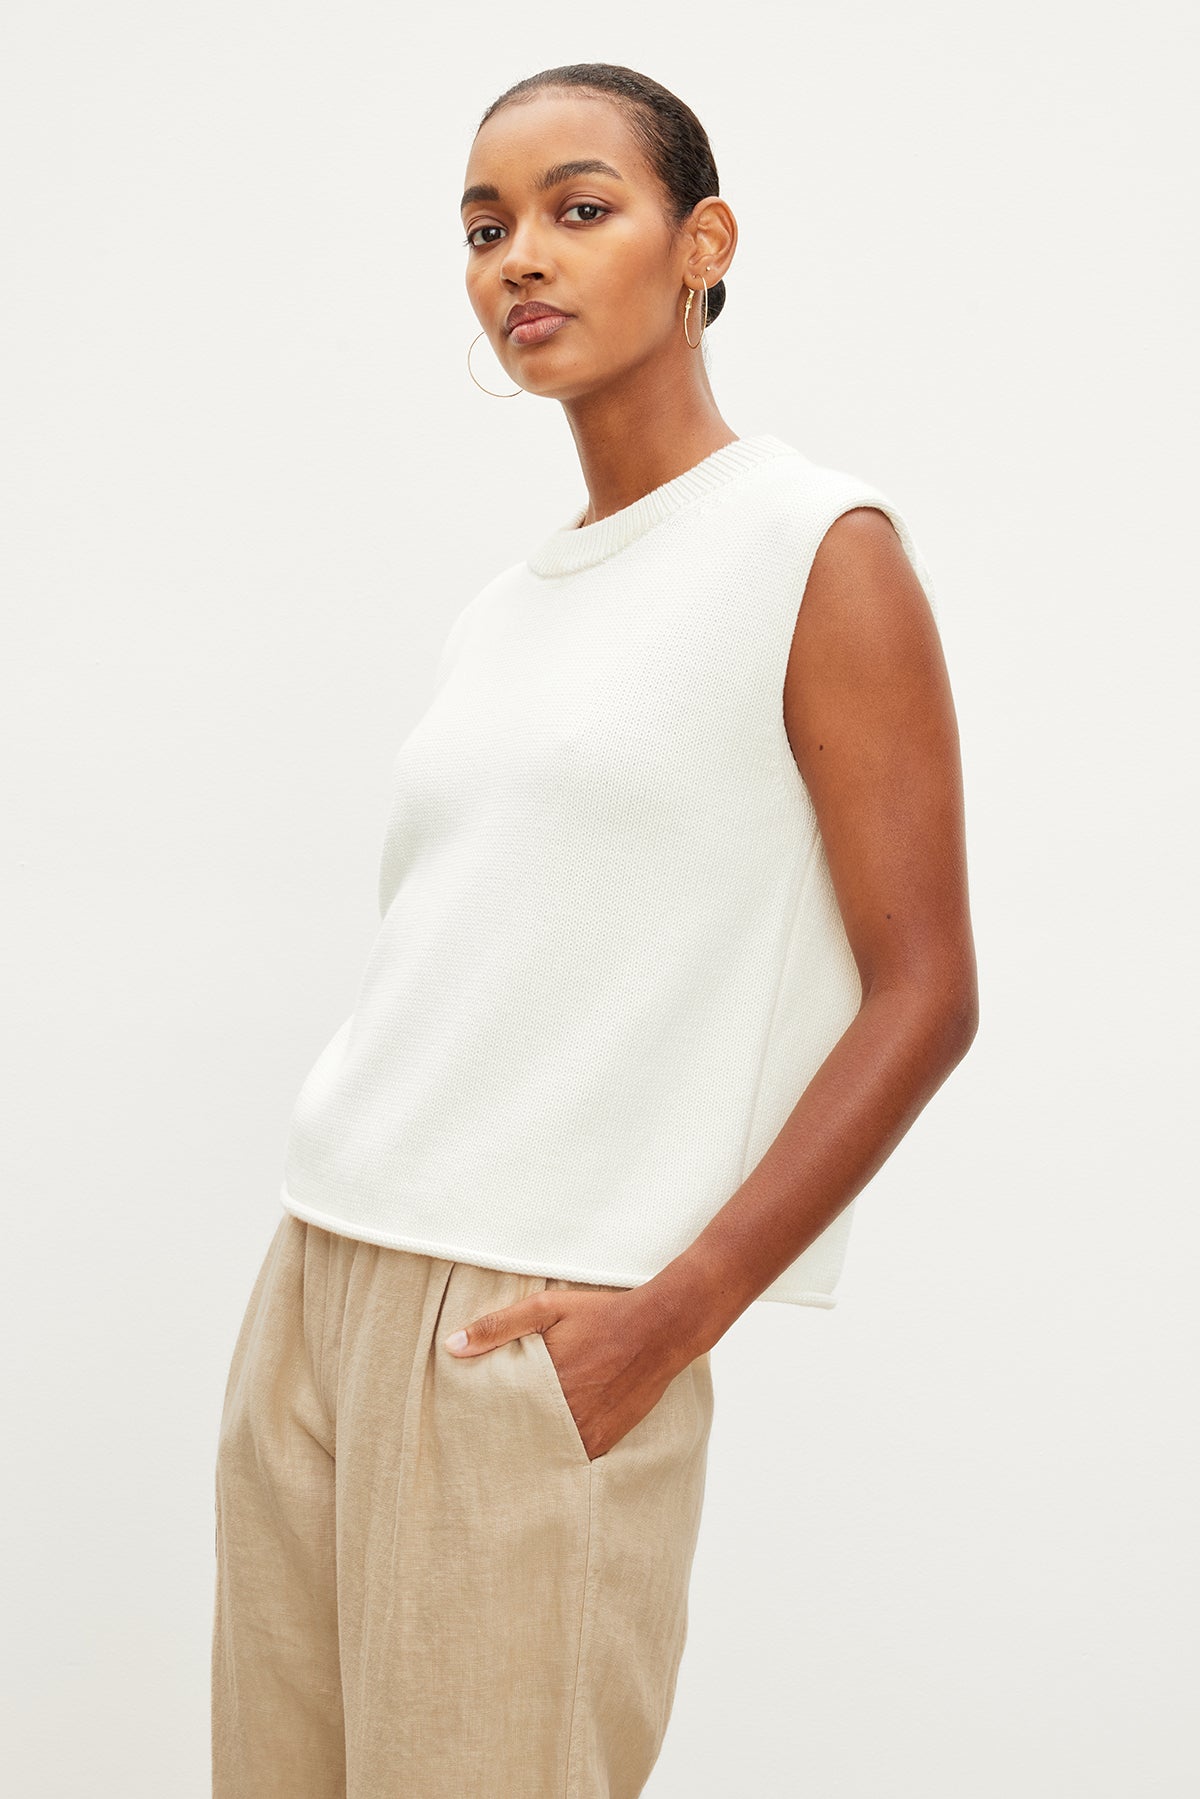 The model is wearing a white ASTER CREW NECK SWEATER and tan trousers, made of a luxurious cotton cashmere blend by Velvet by Graham & Spencer.-35955418529985